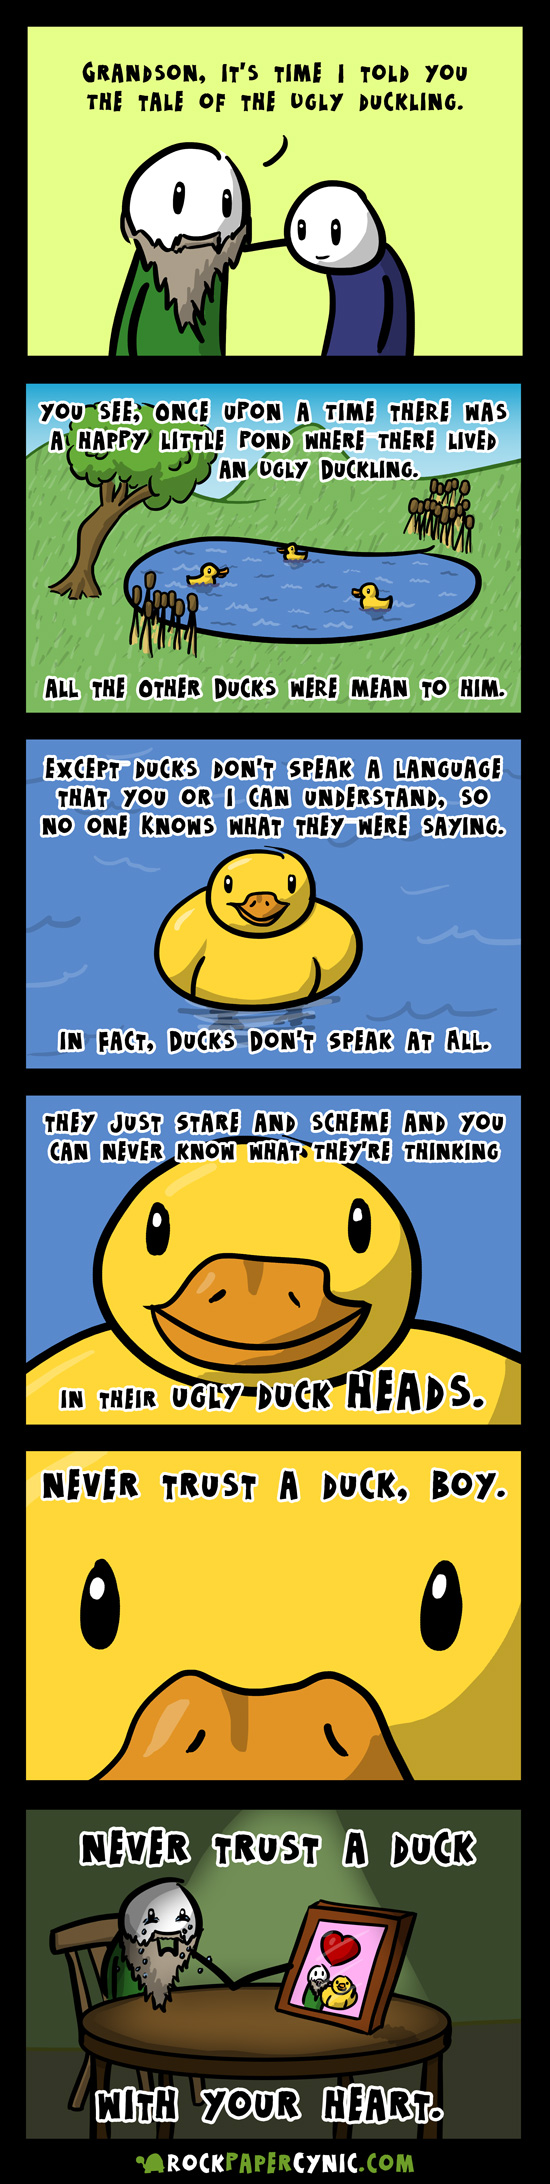 the ugly duckling story goes weird places THANKS GRANDPA I NEEDED TO KNOW THAT